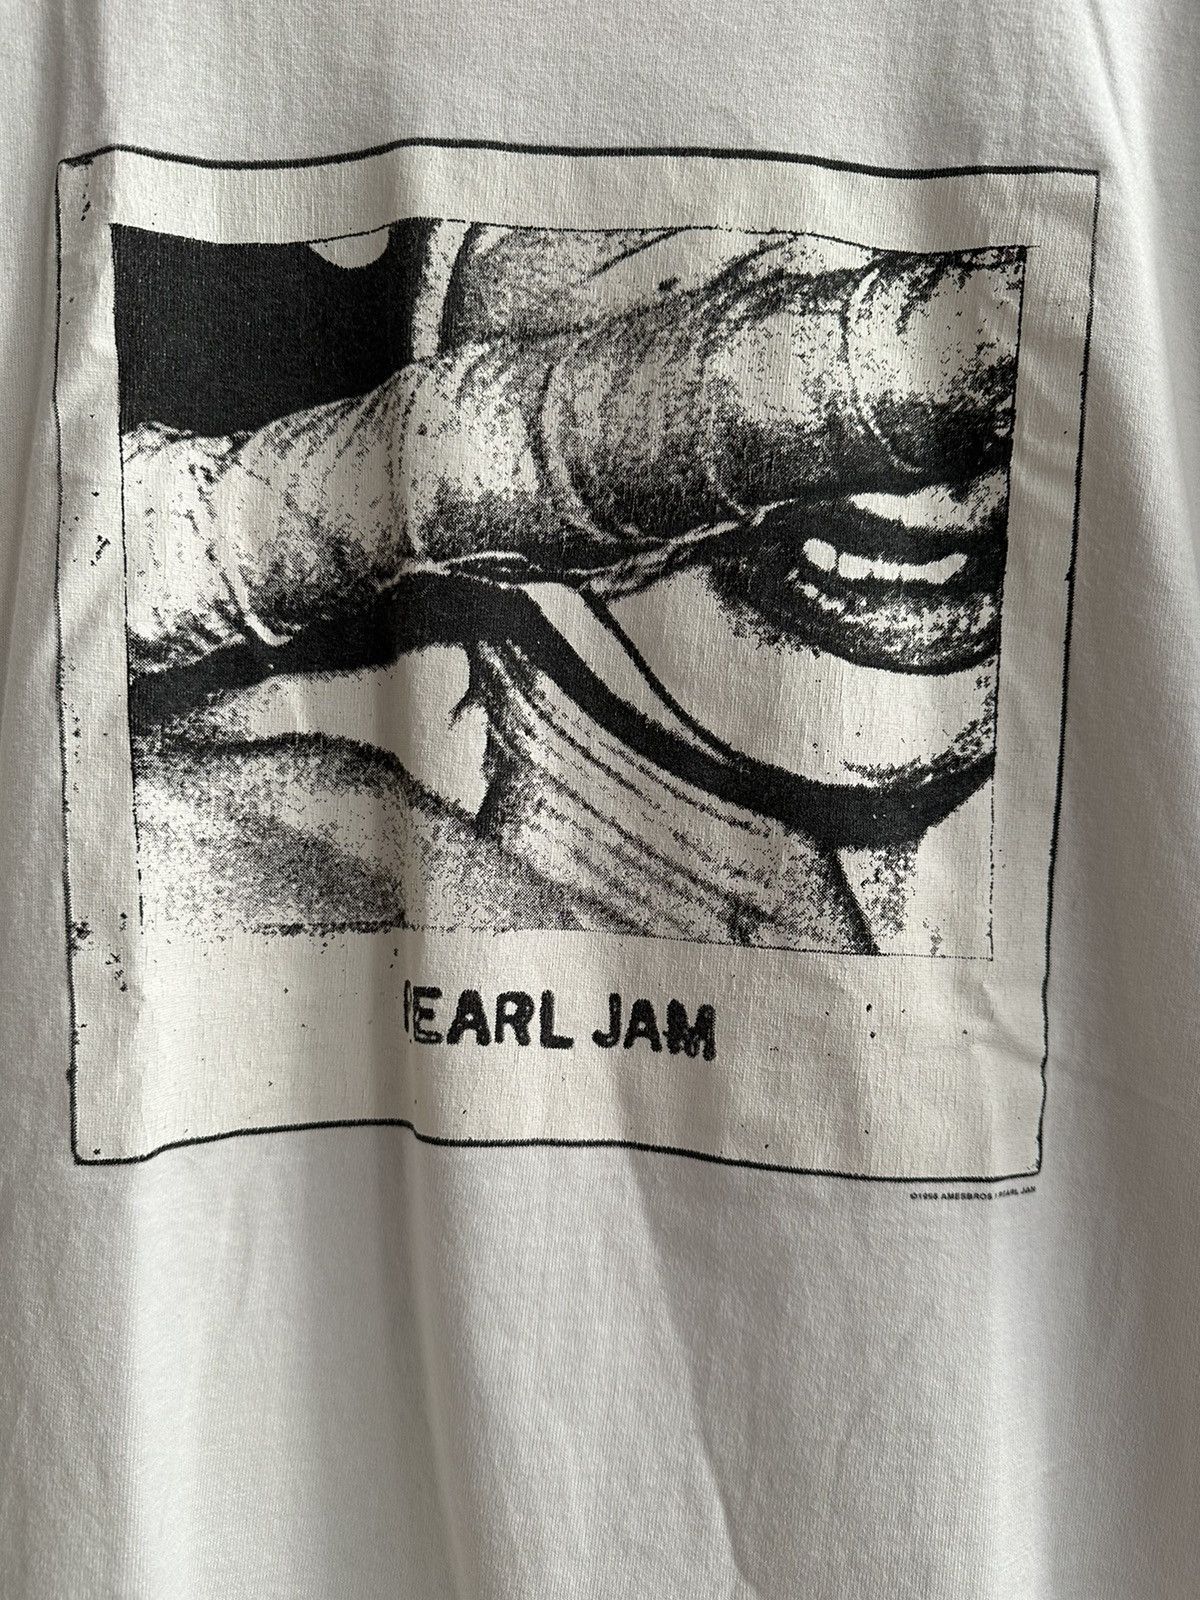 Vintage Vintage 1996 Pearl Jam Ringer Tee Very Rare Seattle WA Date Size US L / EU 52-54 / 3 - 2 Preview